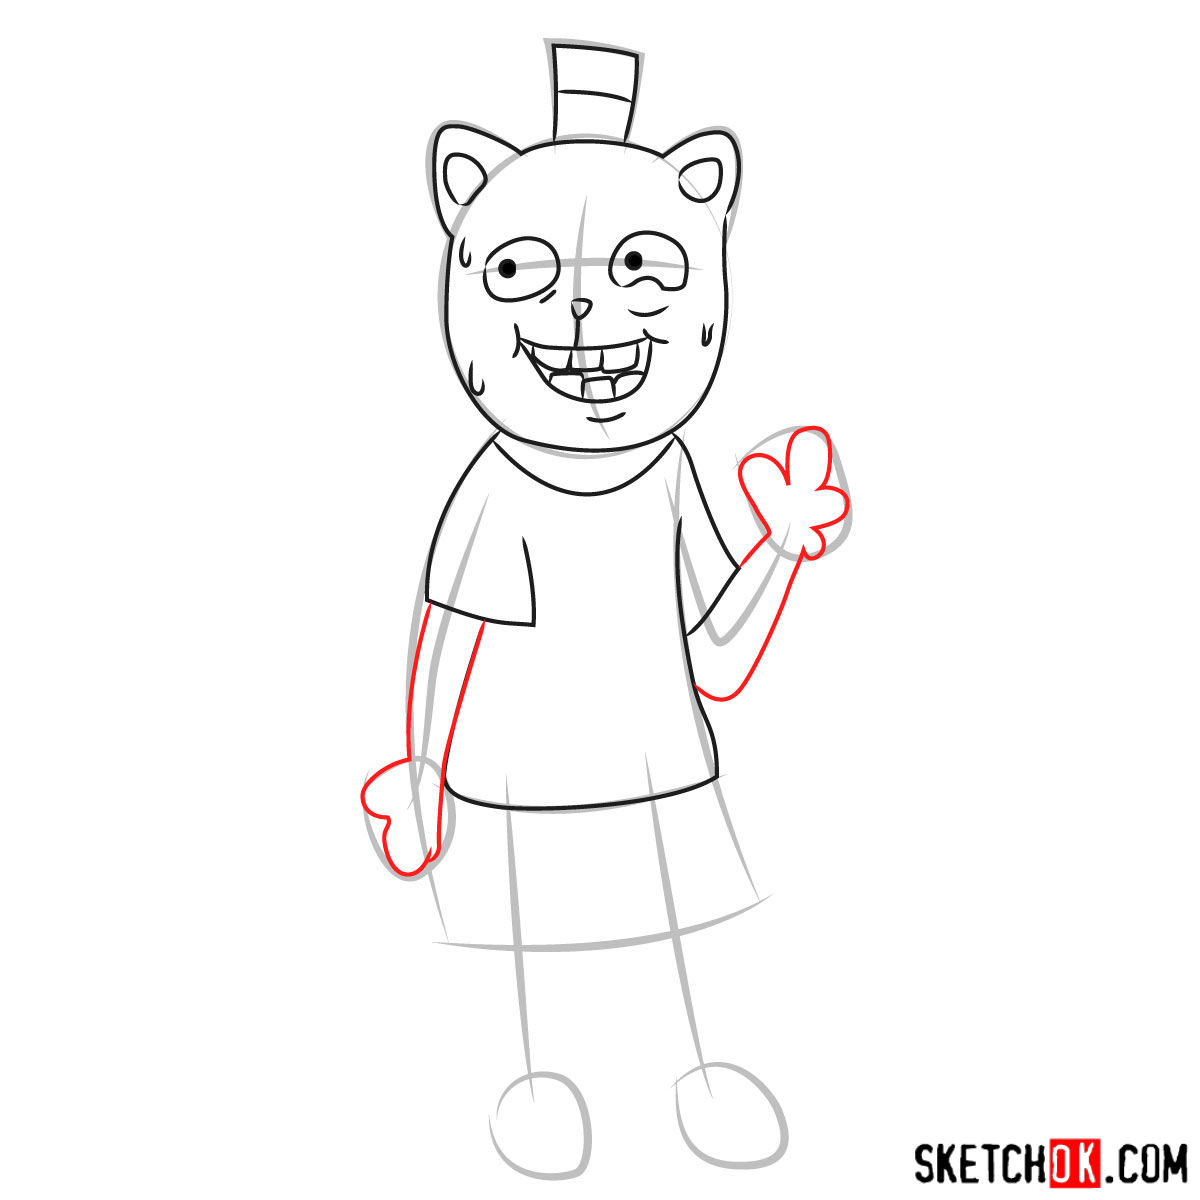 How to draw Burgerpants from Undertale - step 06